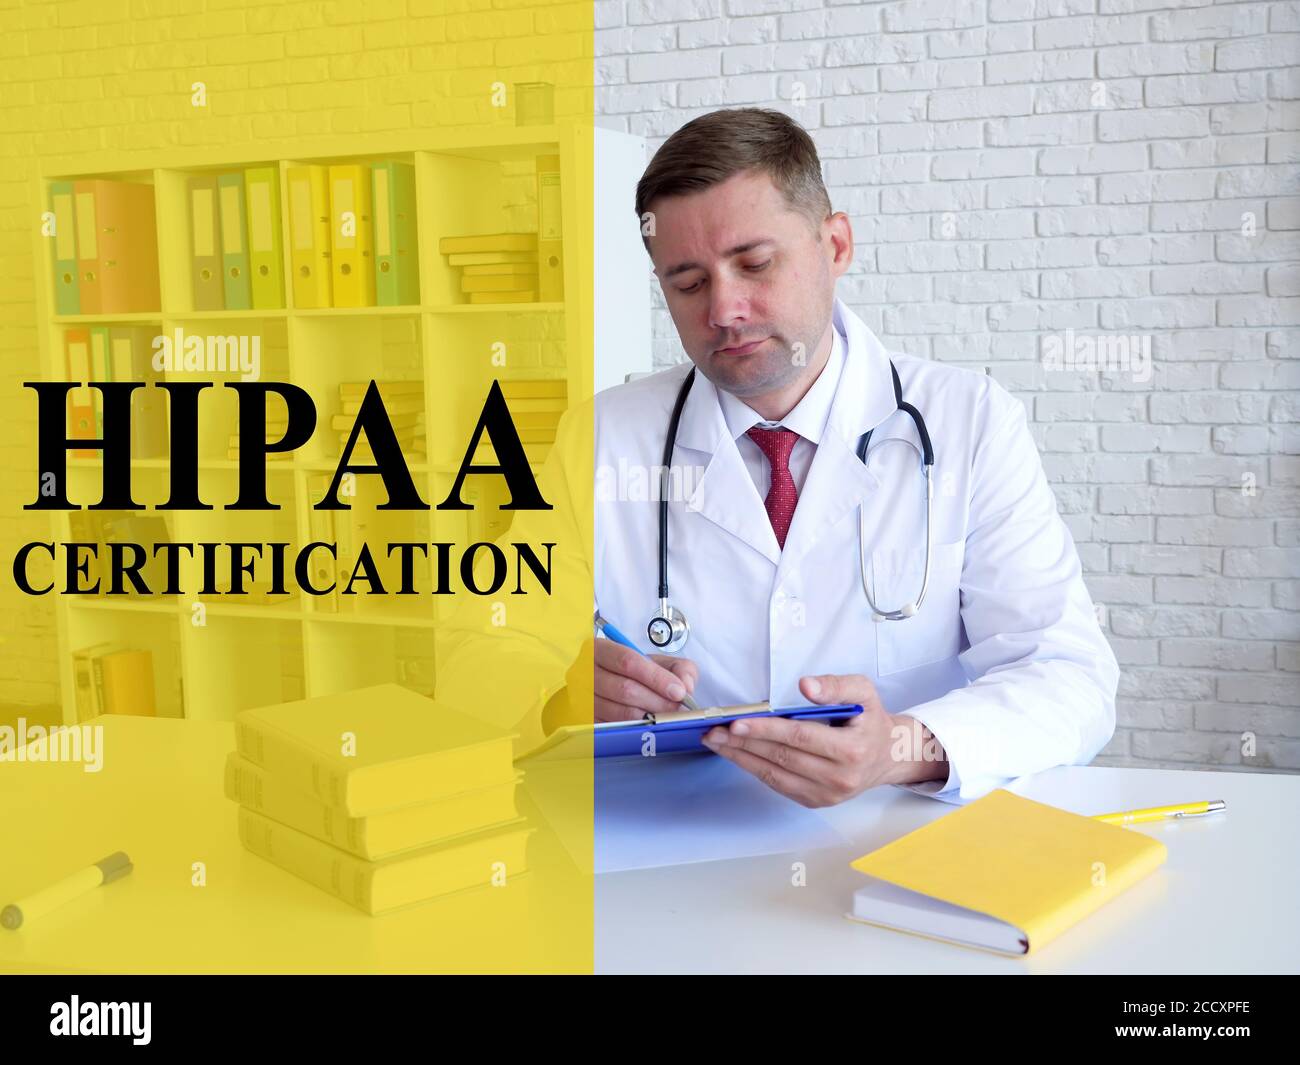 HIPAA certification concept. The doctor fills out documents. Stock Photo